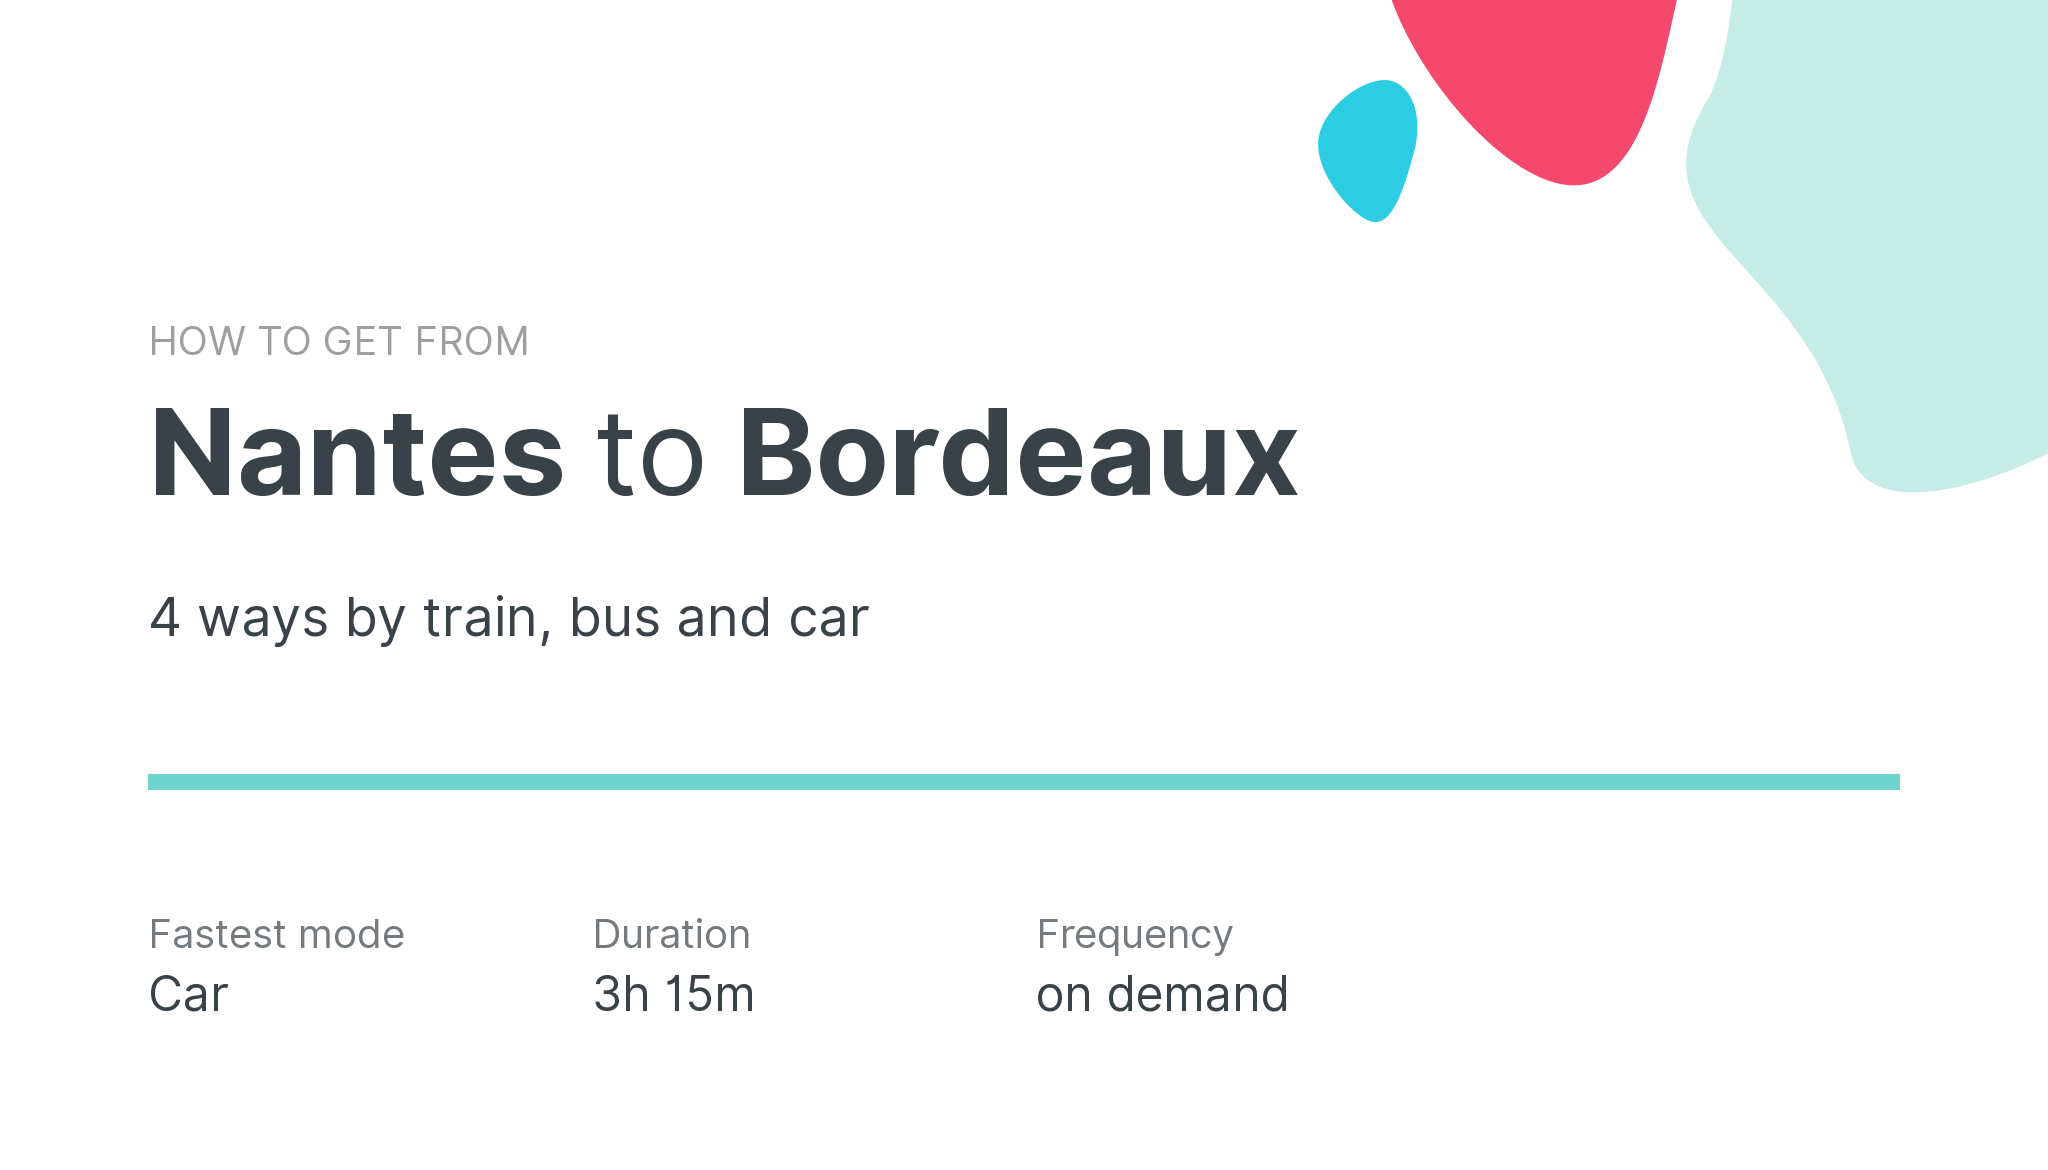 How do I get from Nantes to Bordeaux